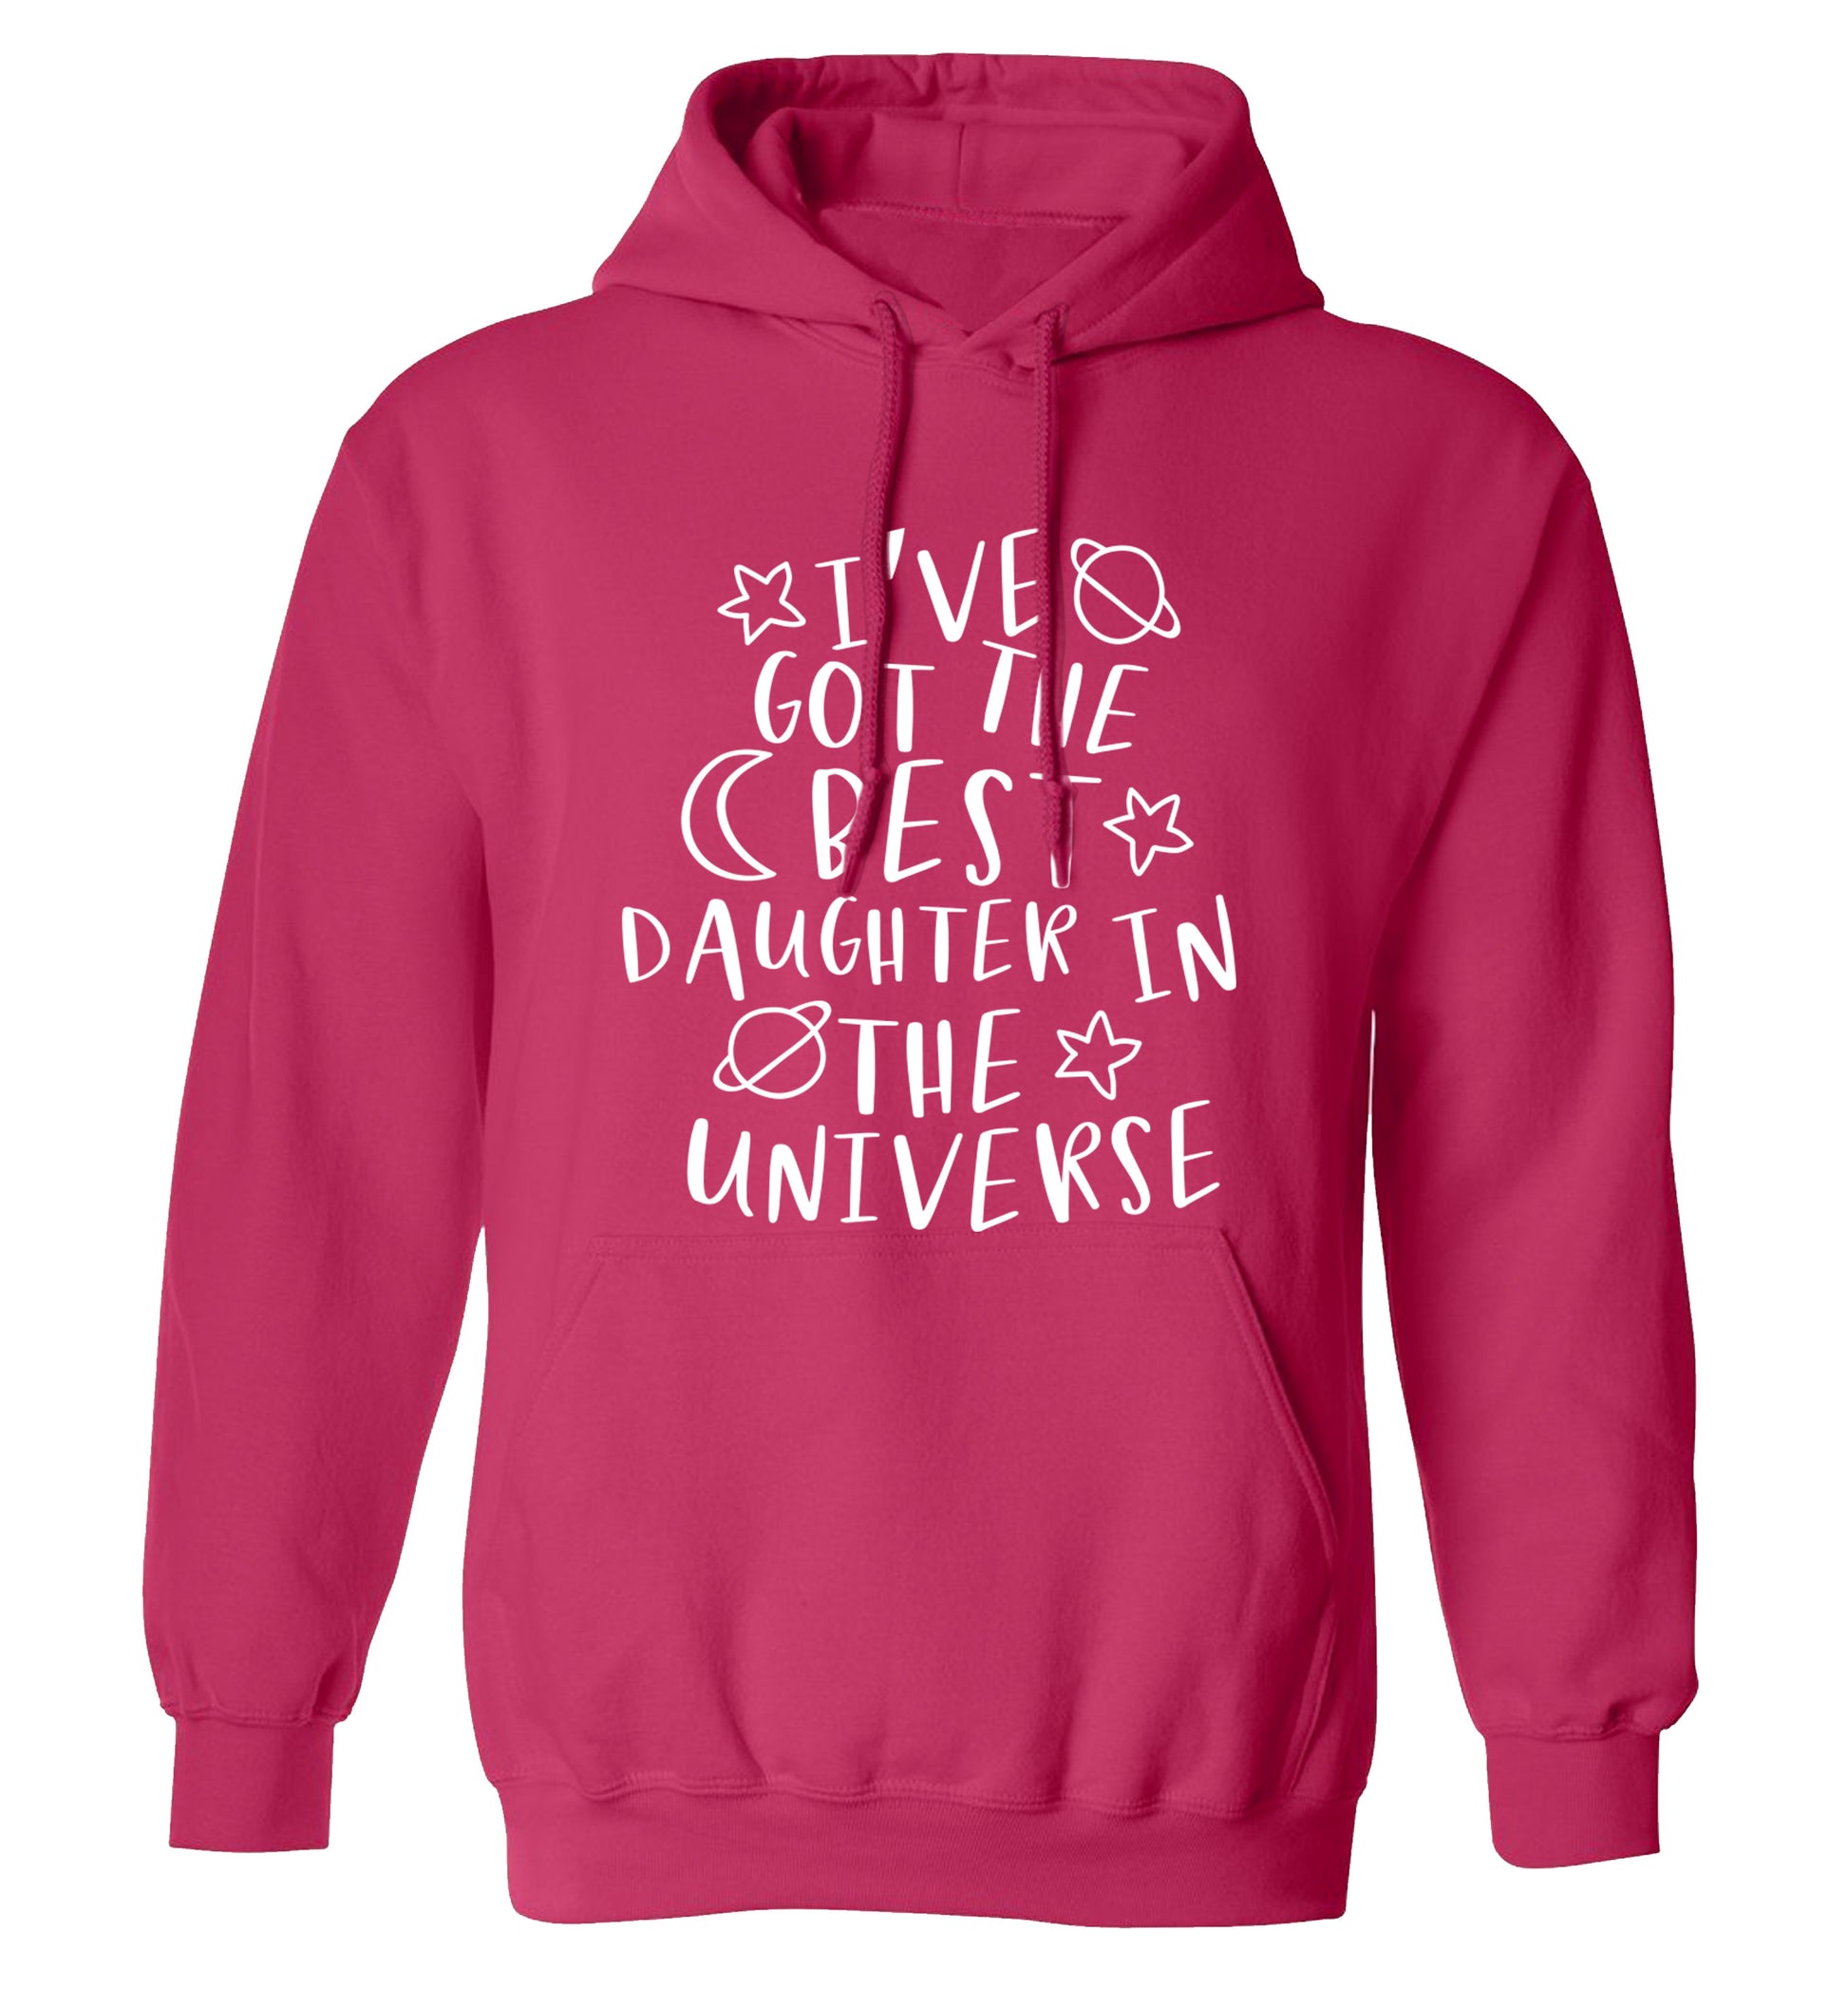 I've got the best daughter in the universe adults unisex pink hoodie 2XL